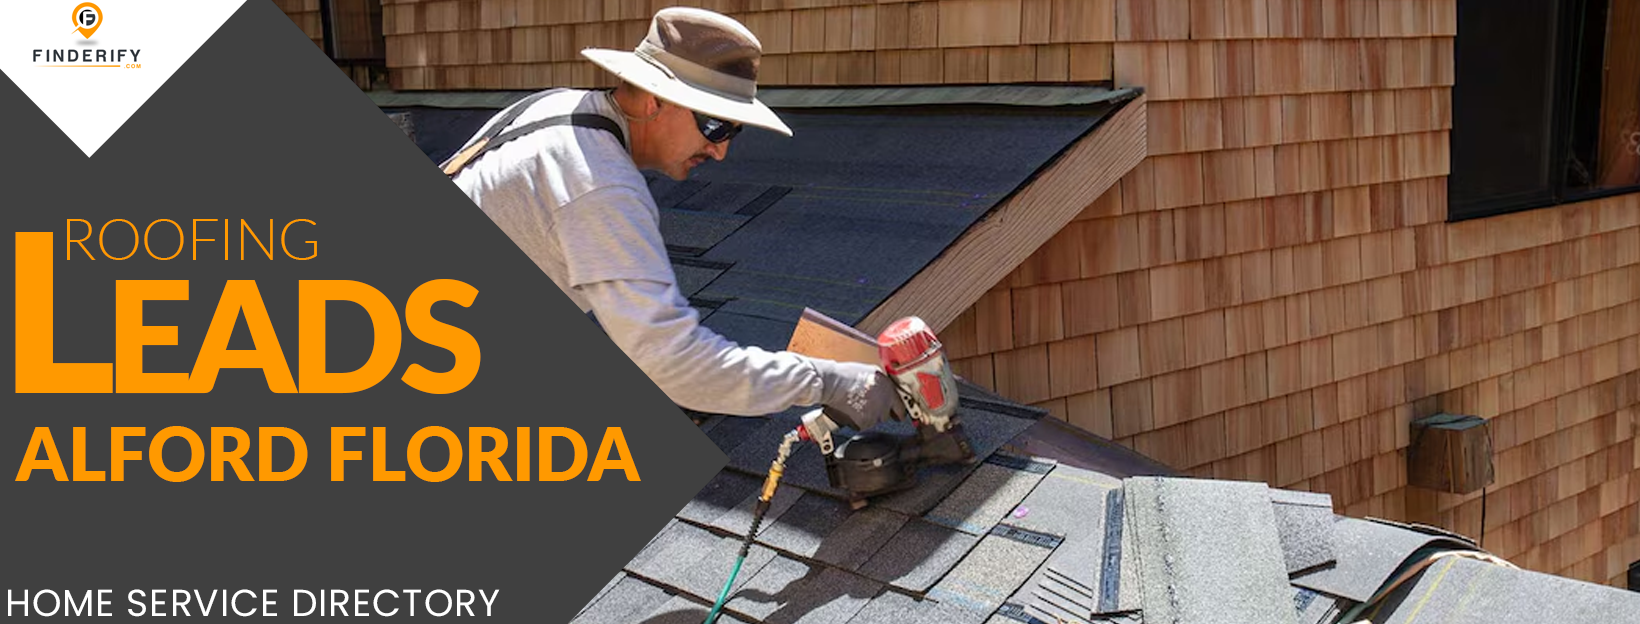 Alford FL Roofing Leads | Get More Customers with Finderify.com